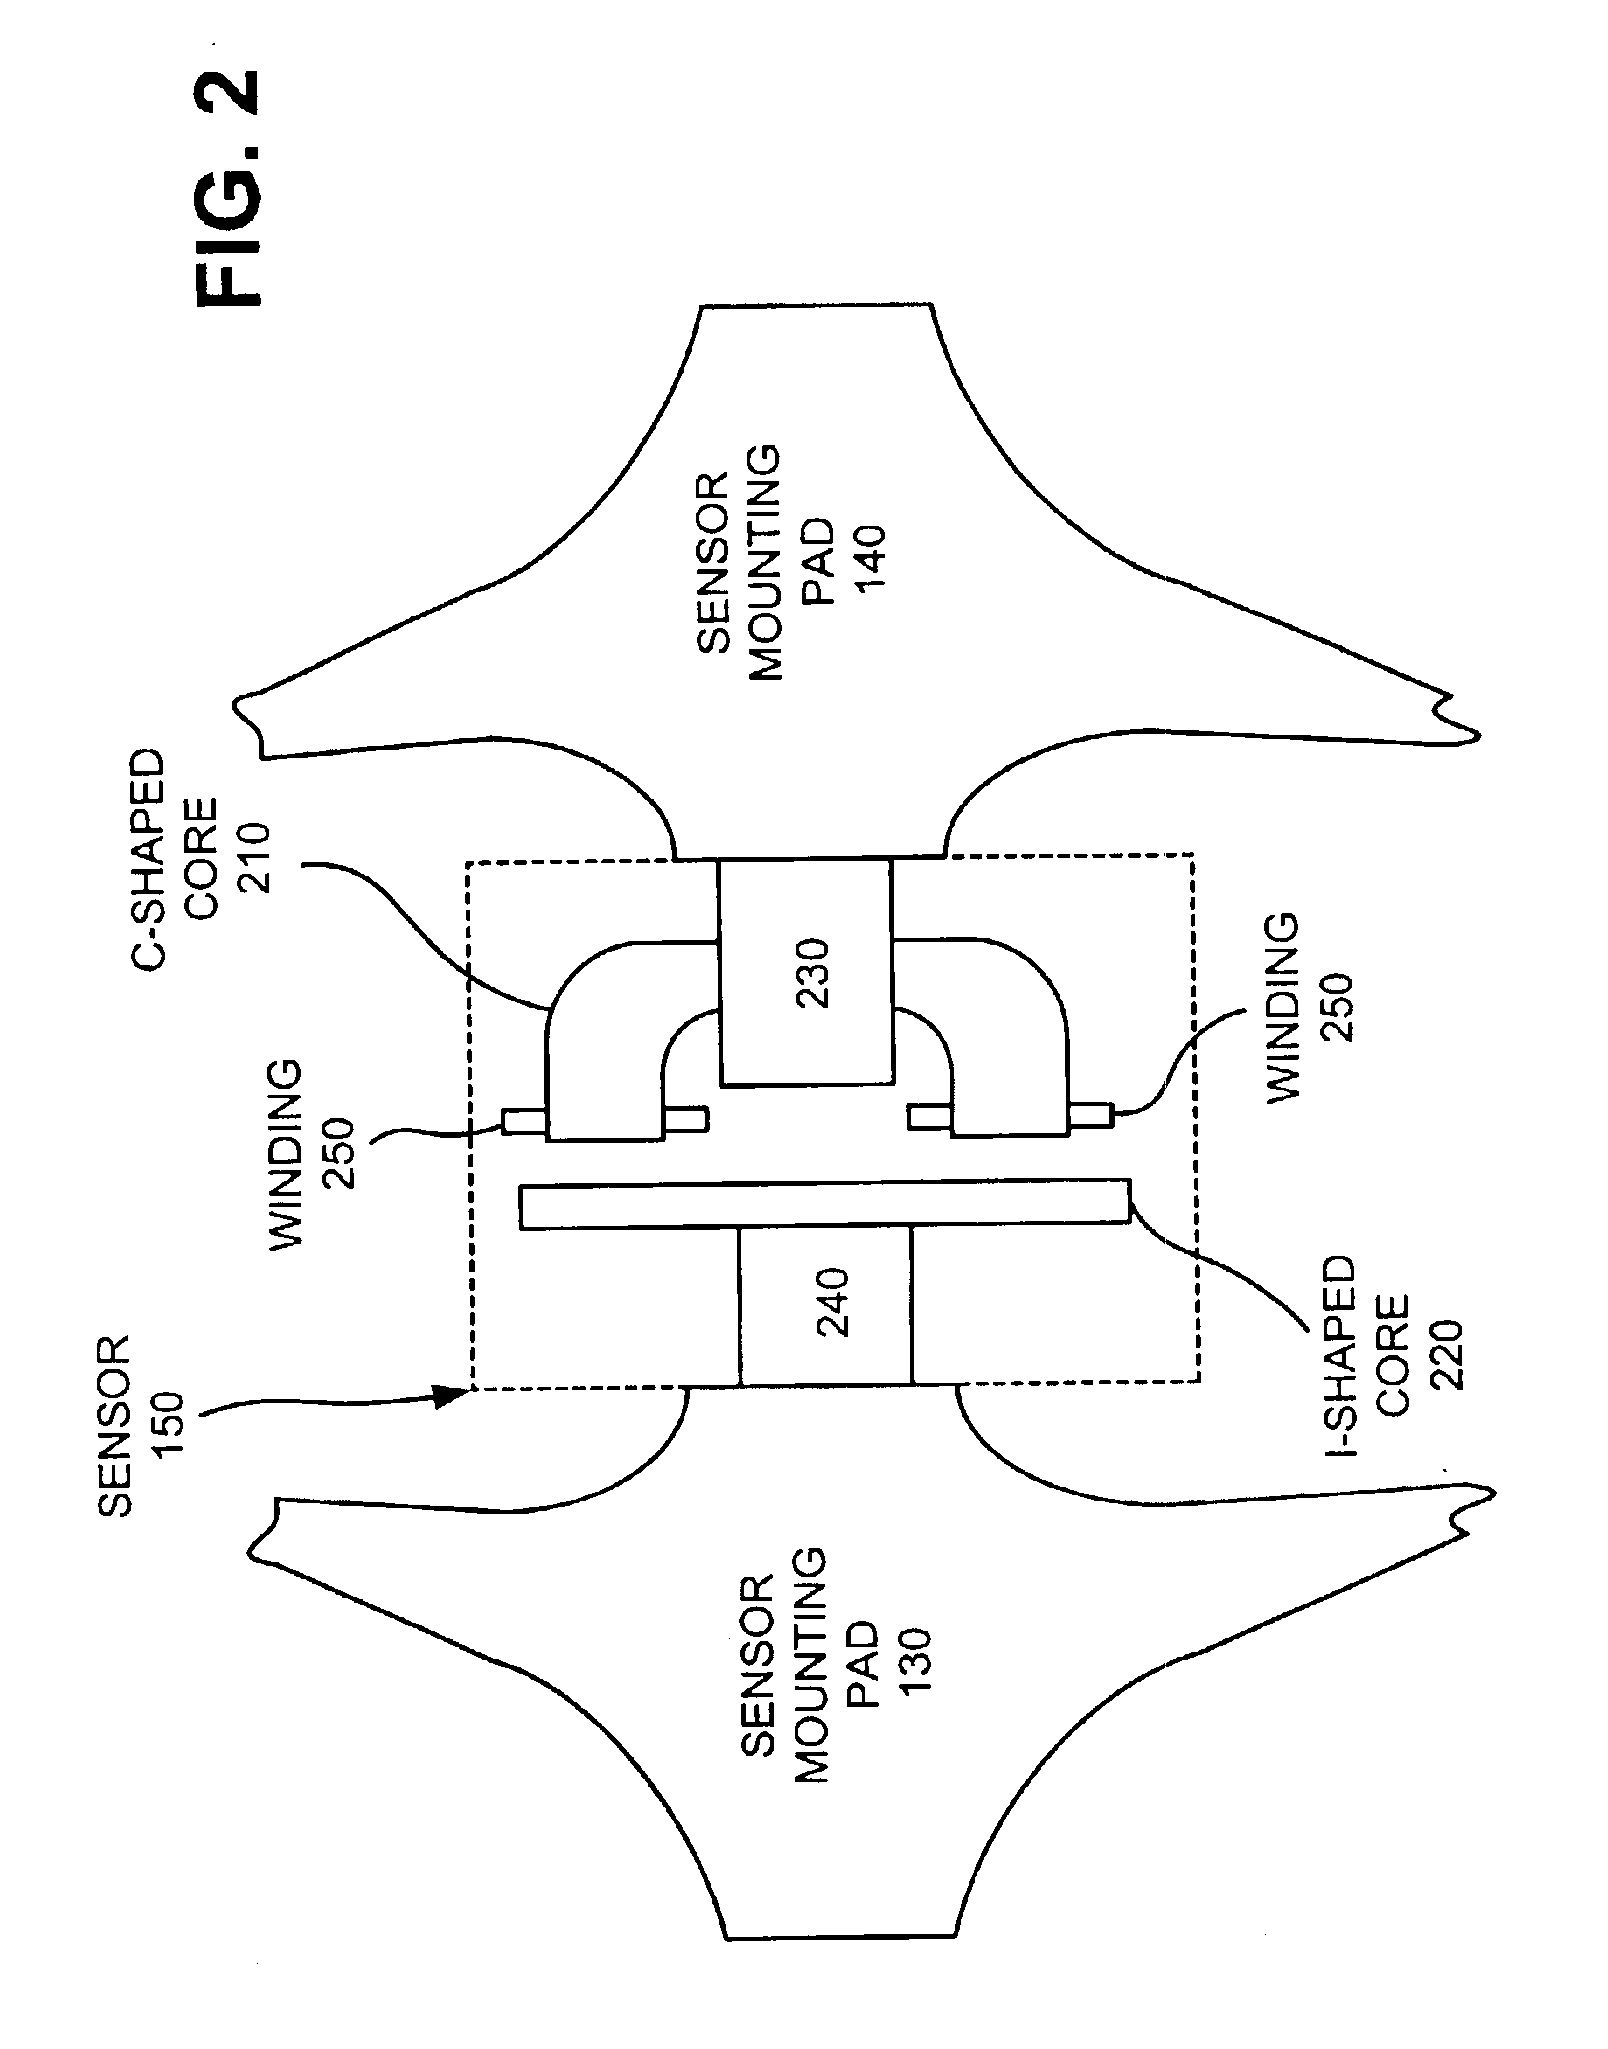 Mechanical amplifier systems and methods